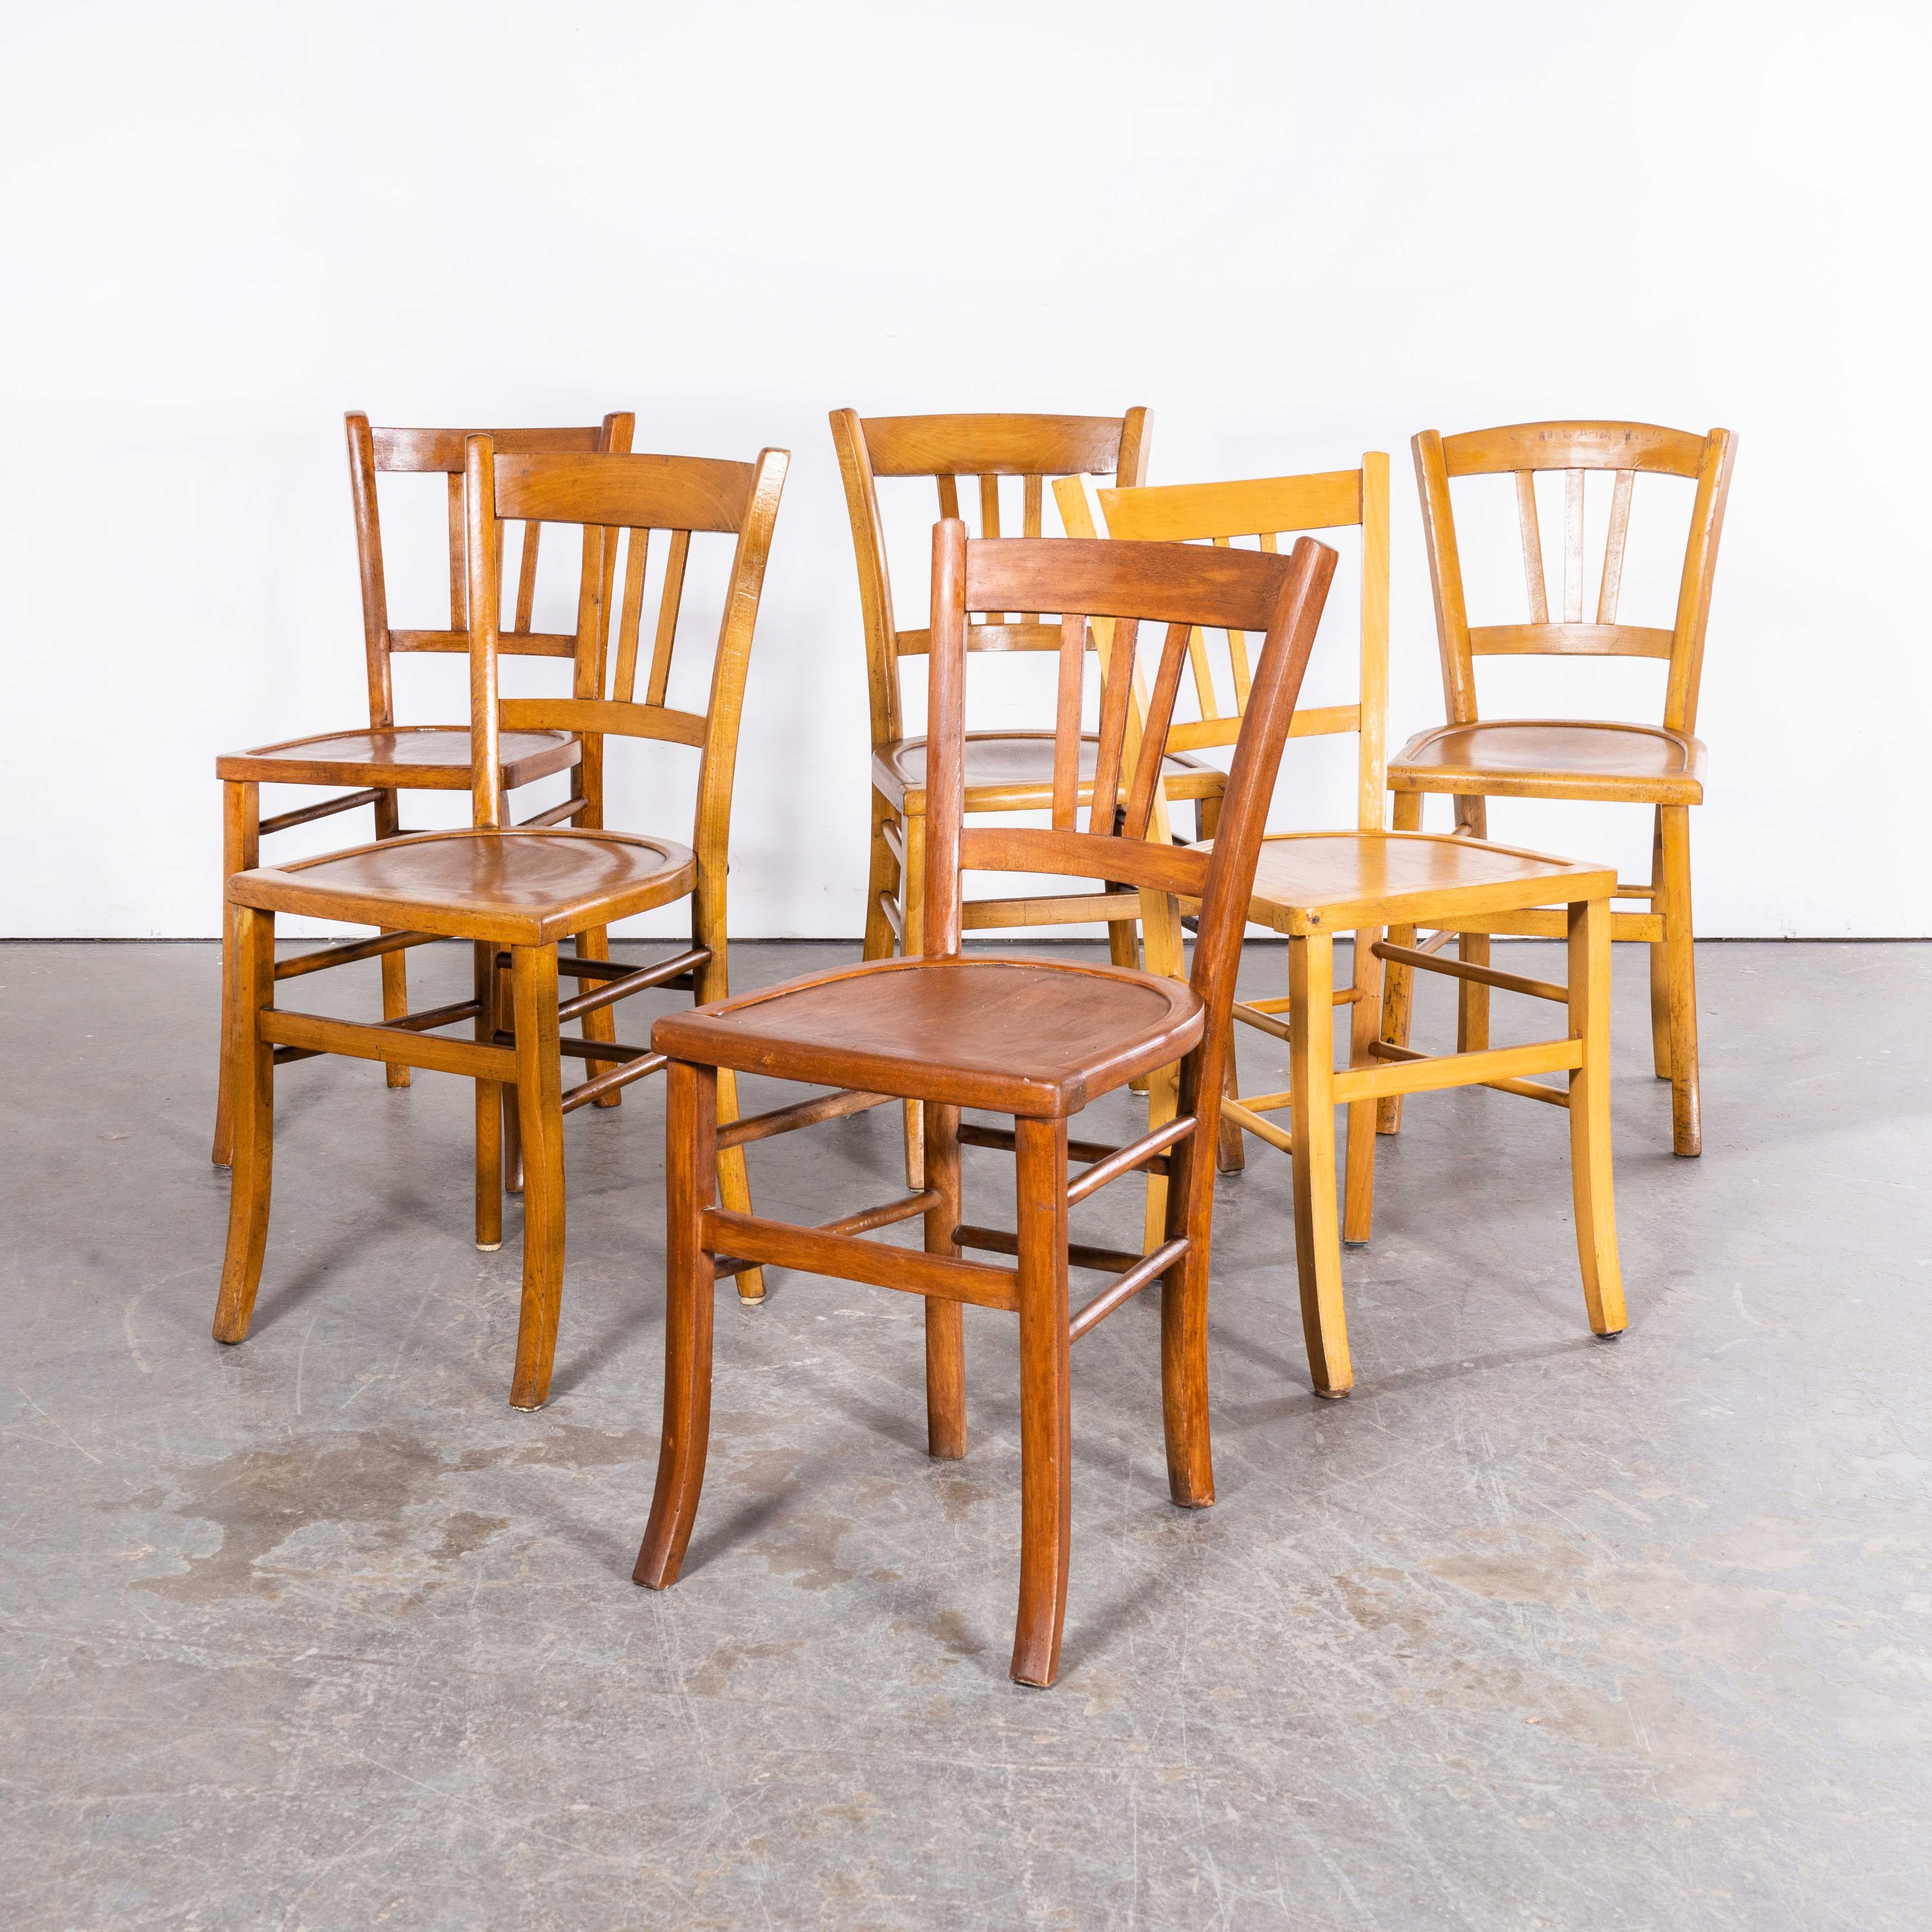 1950’s Standard Blonde Farmhouse French Mixed Dining Chairs – Set Of Six
1950’s Standard Blonde Farmhouse French Mixed Dining Chairs – Set Of Six. This listing is for what we call a ‘standard shape’ of blonde farmhouse dining chairs. Good quantities